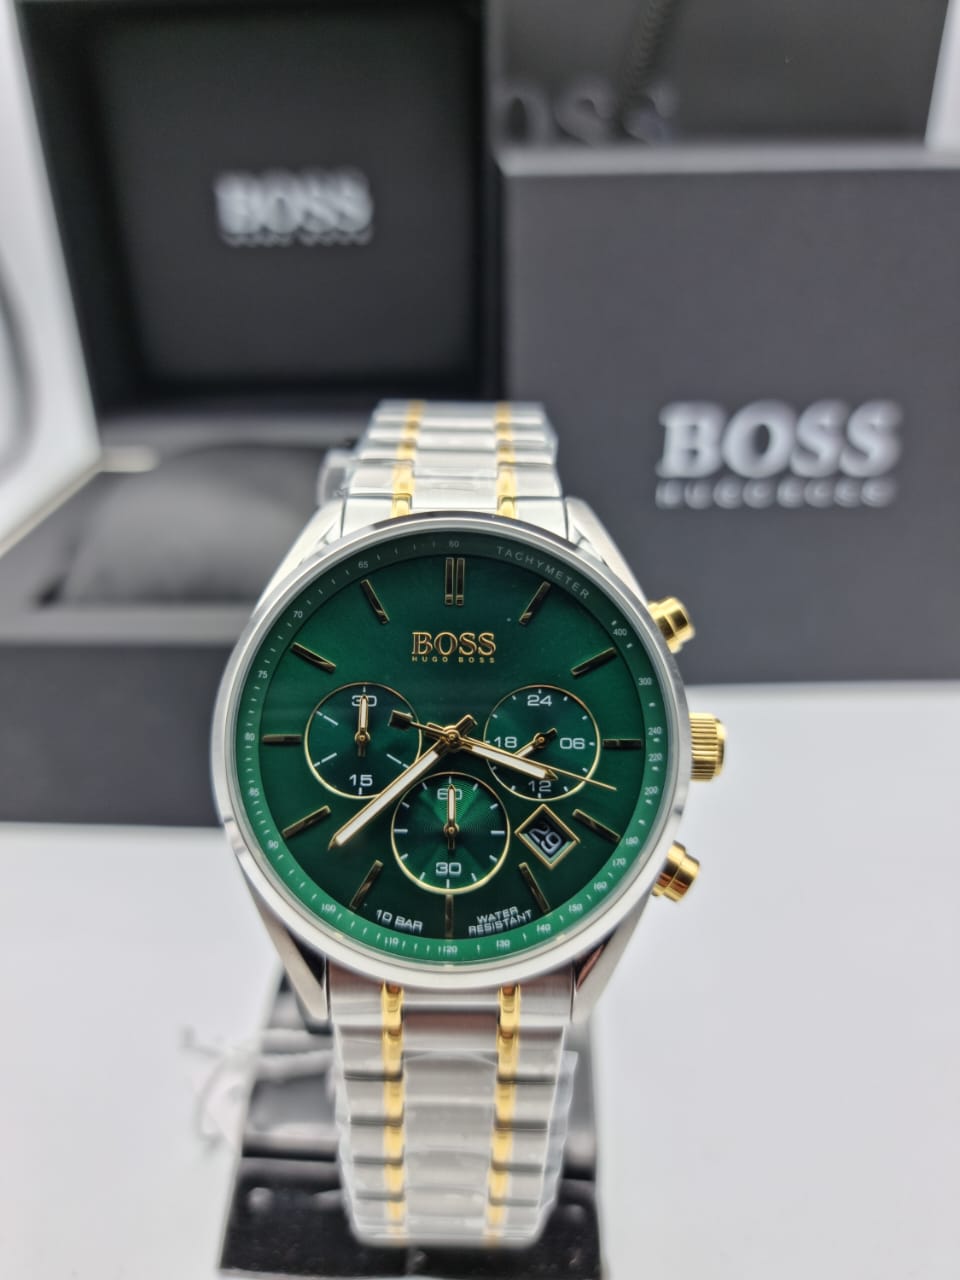 BOSS Men Analog Quartz Watch with Stainless Steel Strap 1513878